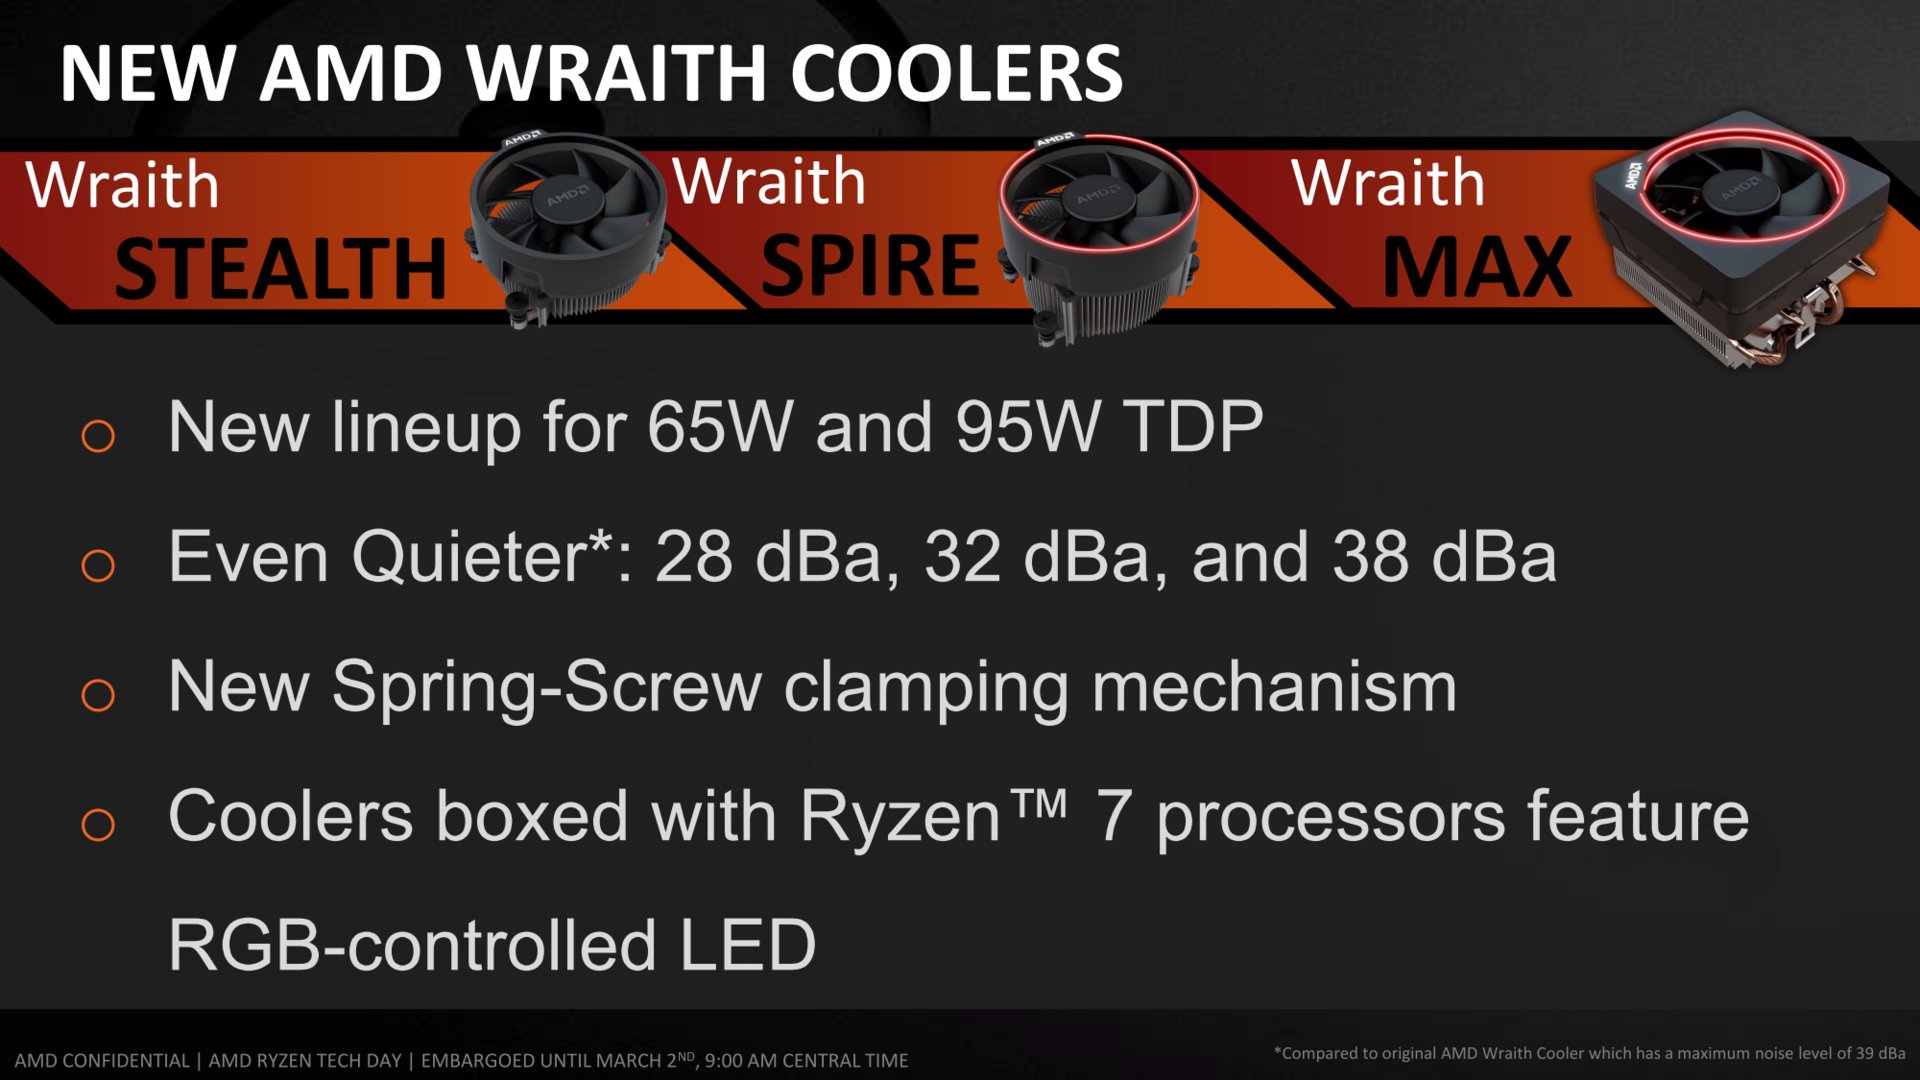 The boxed cooler for AMD Ryzen "class =" border-image